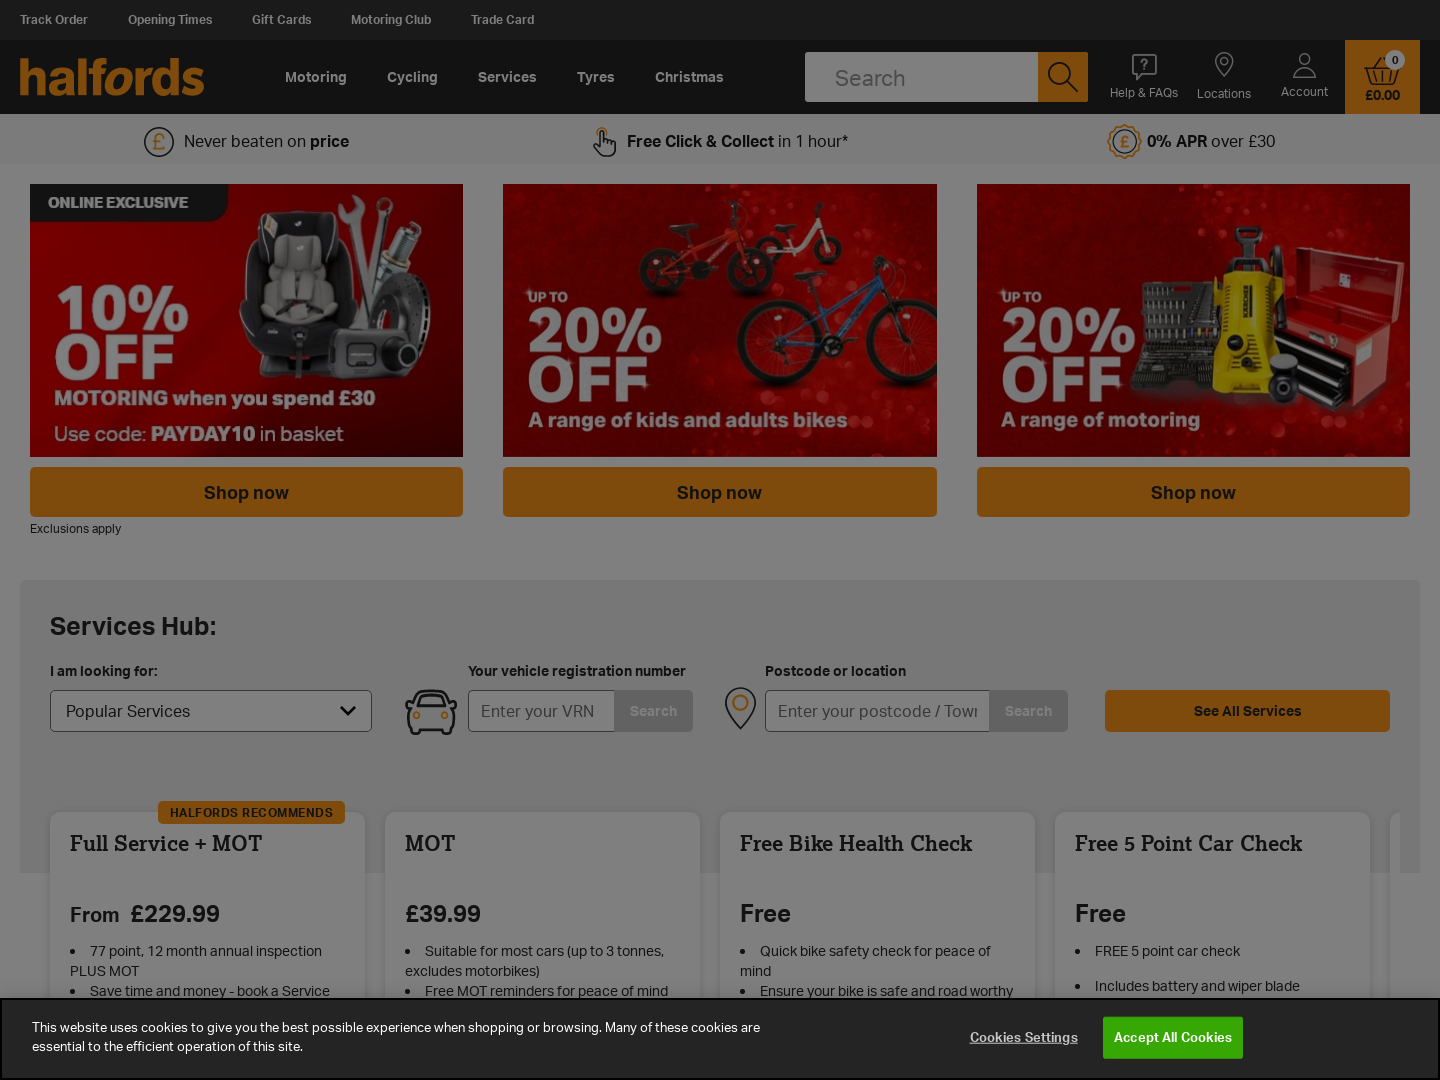 "Halfords secures $3m investment from Bridgestone for Avayler"